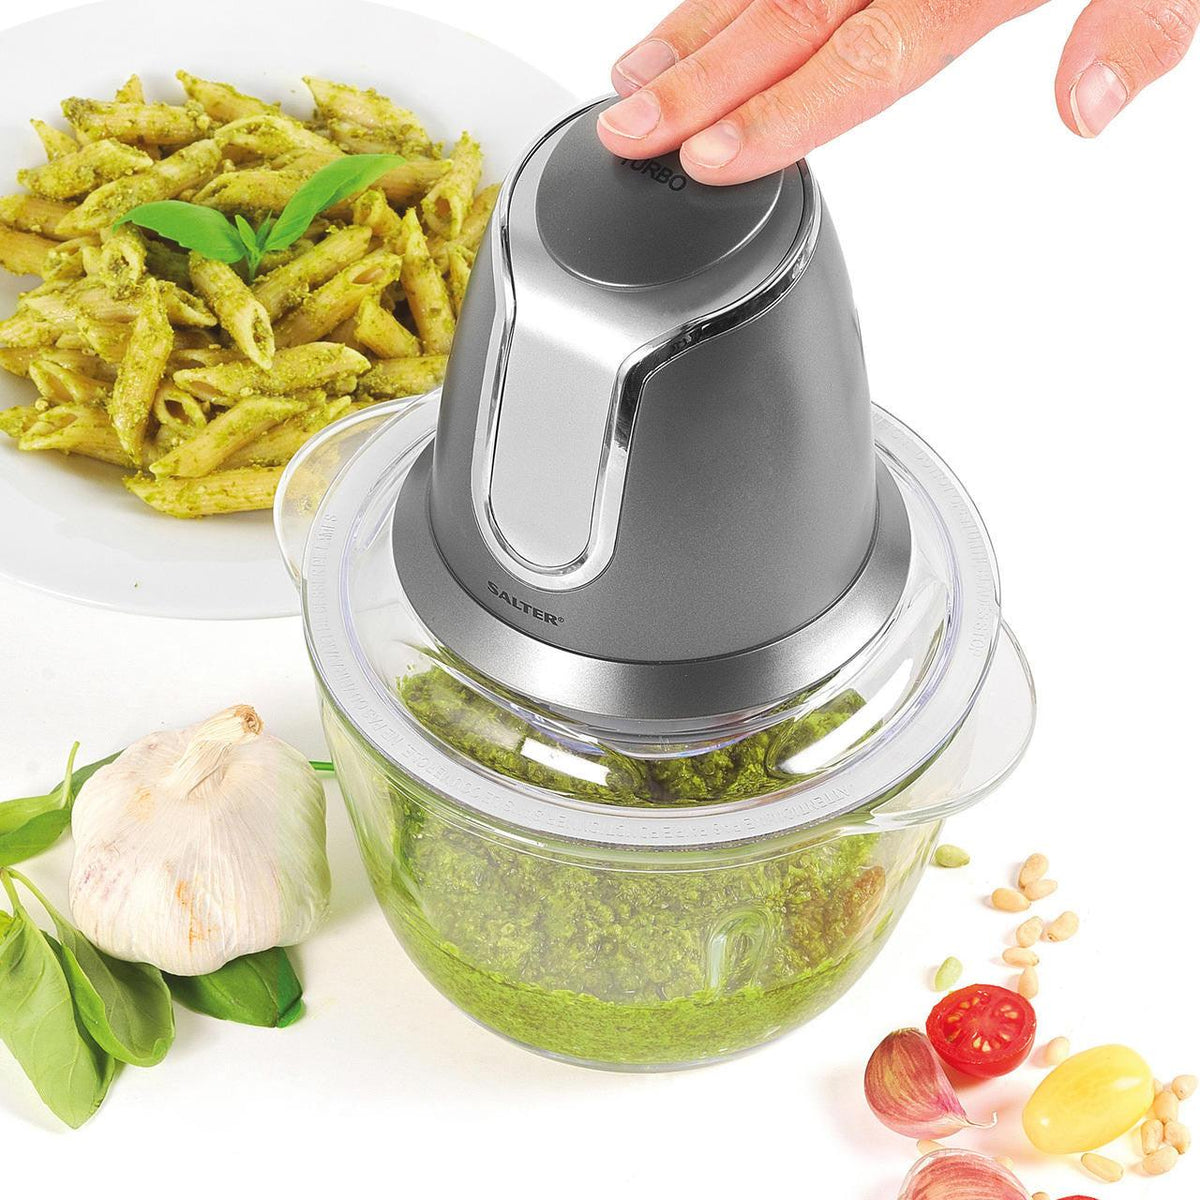 Progress Shimmer Glass Chopper with Stainless Steel Blade | 500W - Choice Stores